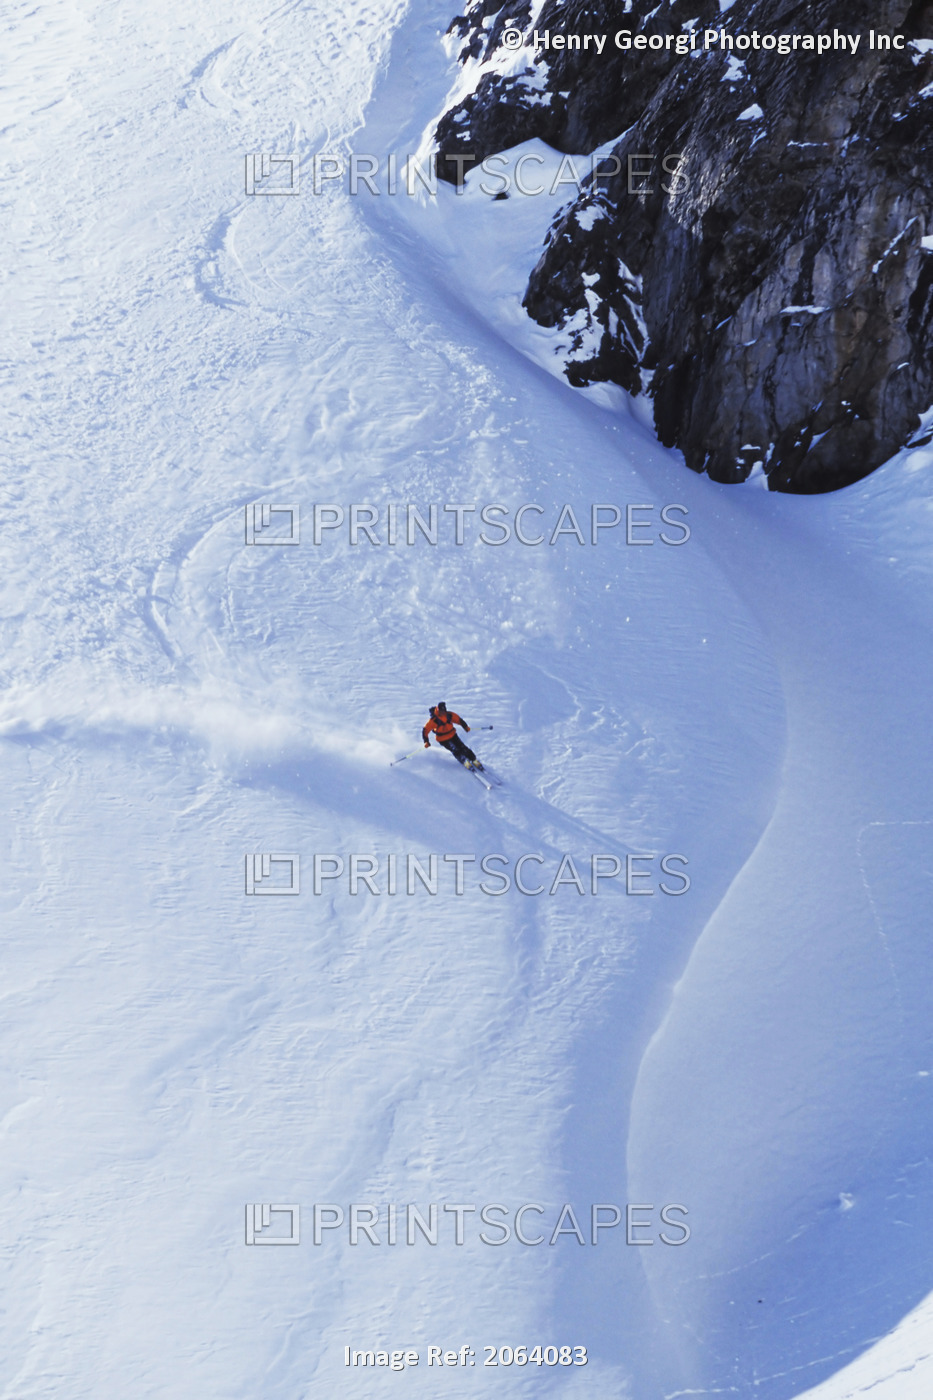 Young Man Skiing On Ungroomed Slope Near Fortress Mountain, Alberta, Canada.